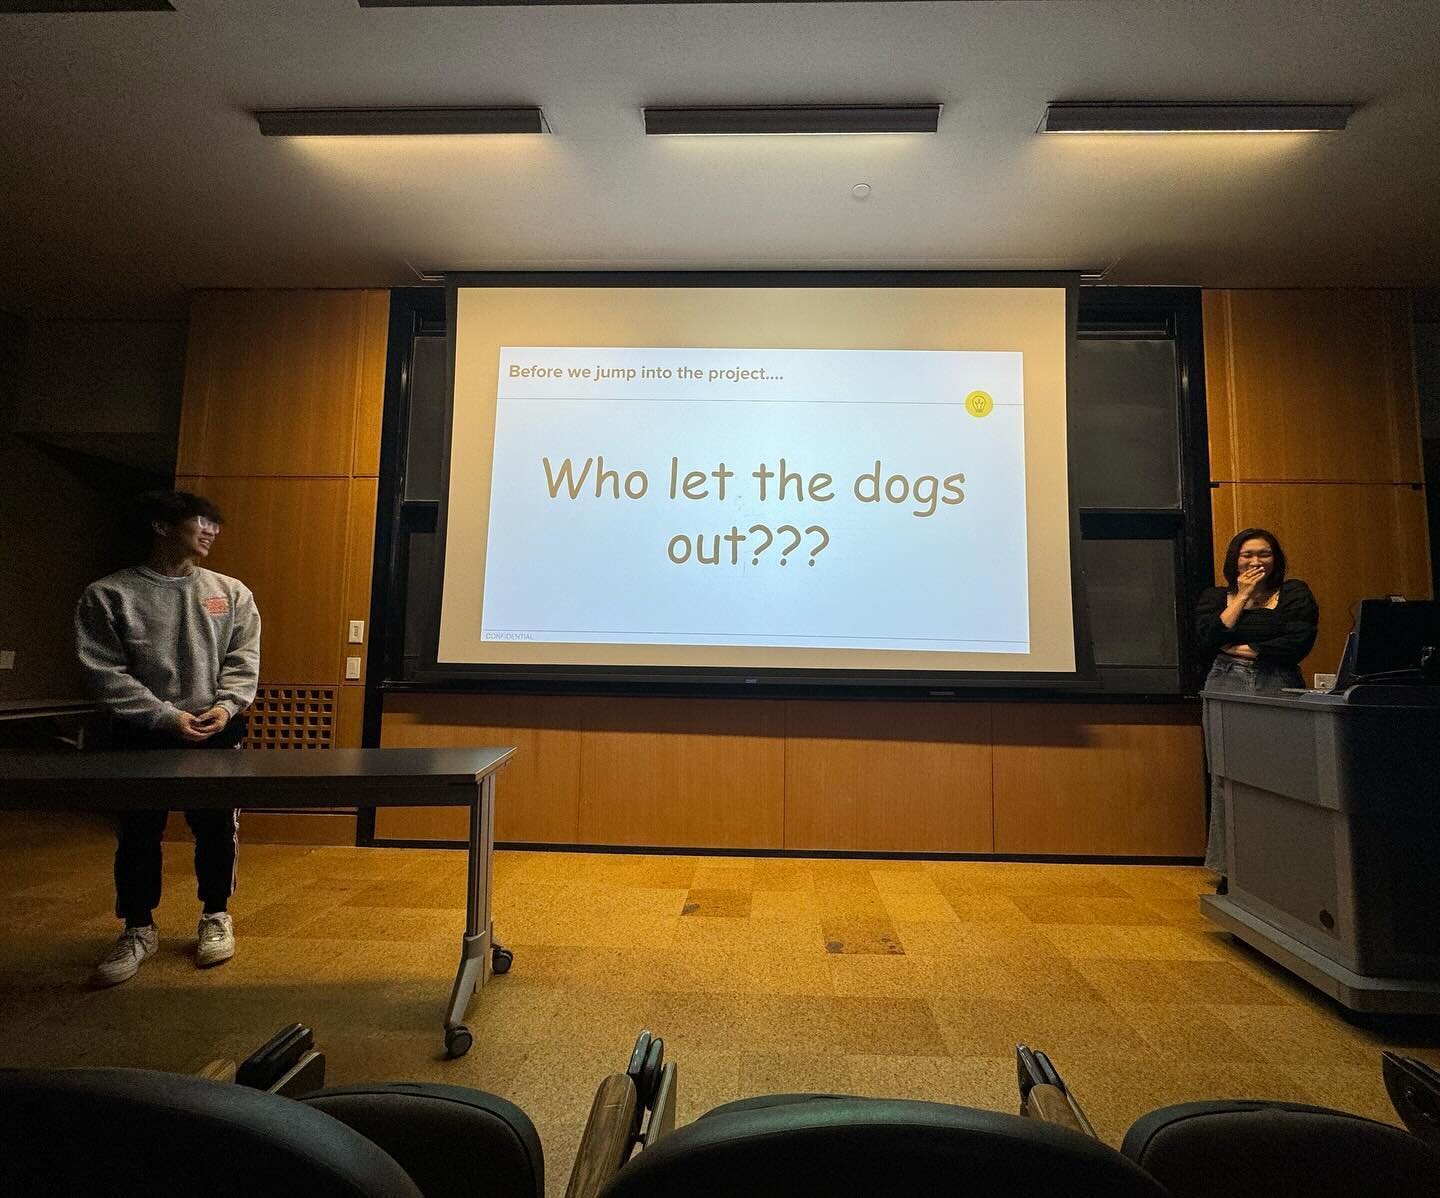 Last week, SCNO members had a great time giving presentations on some very serious, very important topics. Thank you to everyone who participated in our PowerPoint night!